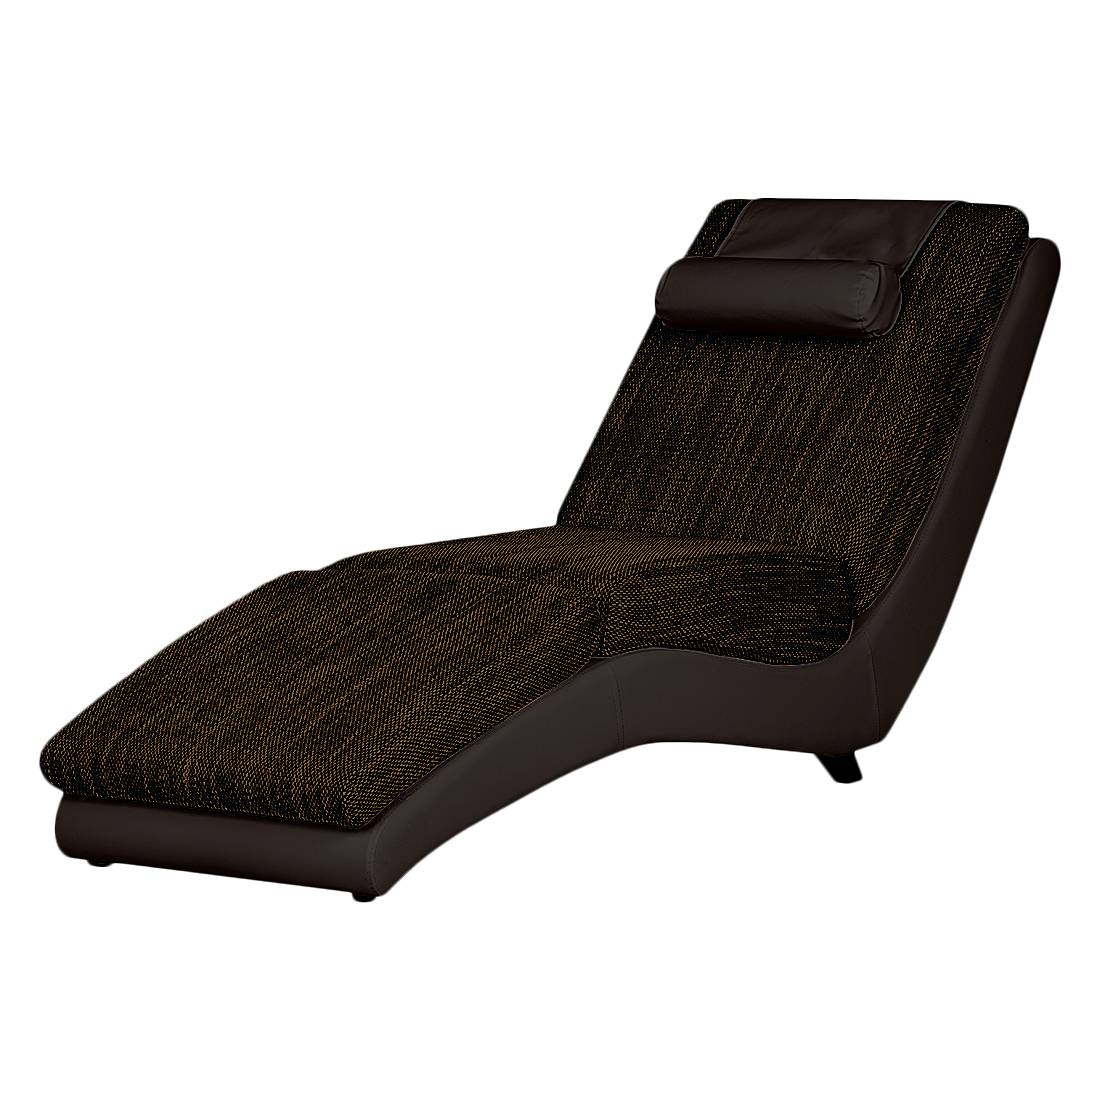 Image of Chaise longue de relaxation Carson 000000001000085099